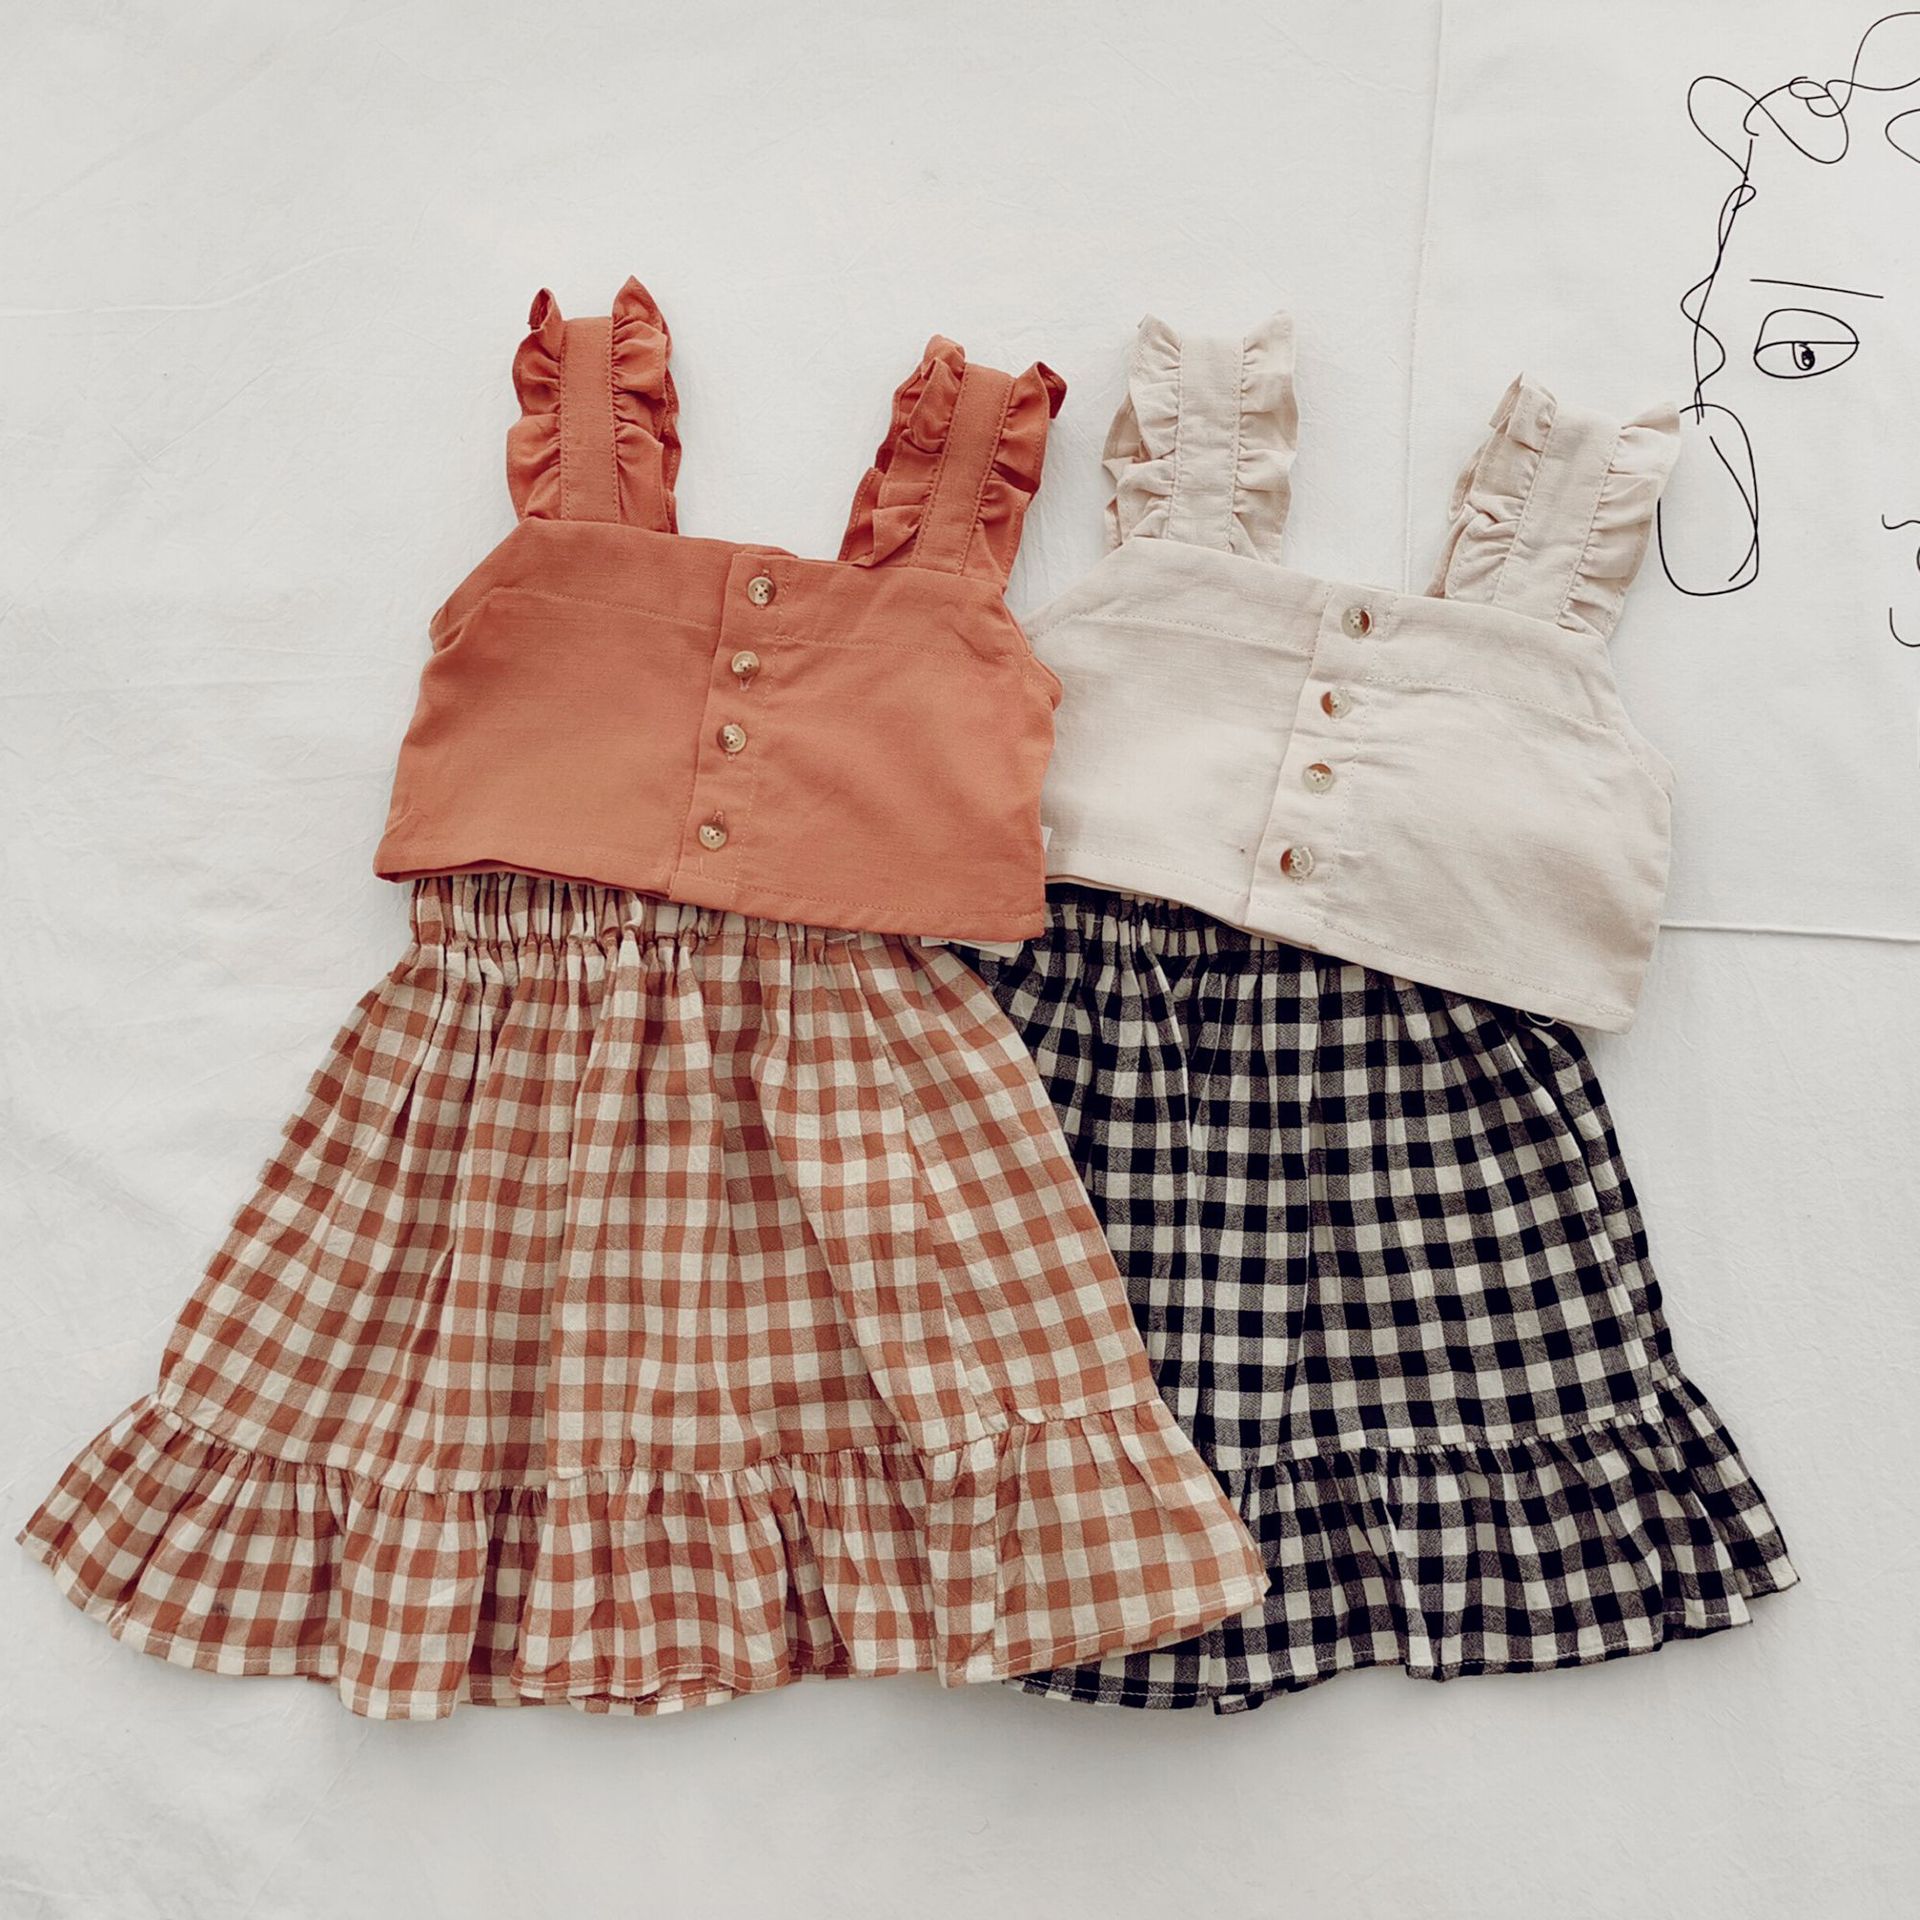 2Piece Toddler Baby Girls Outfits Set,Sleeveless Embroidery Floral Print Vest Tanks Top Plaid Skirts for Summer